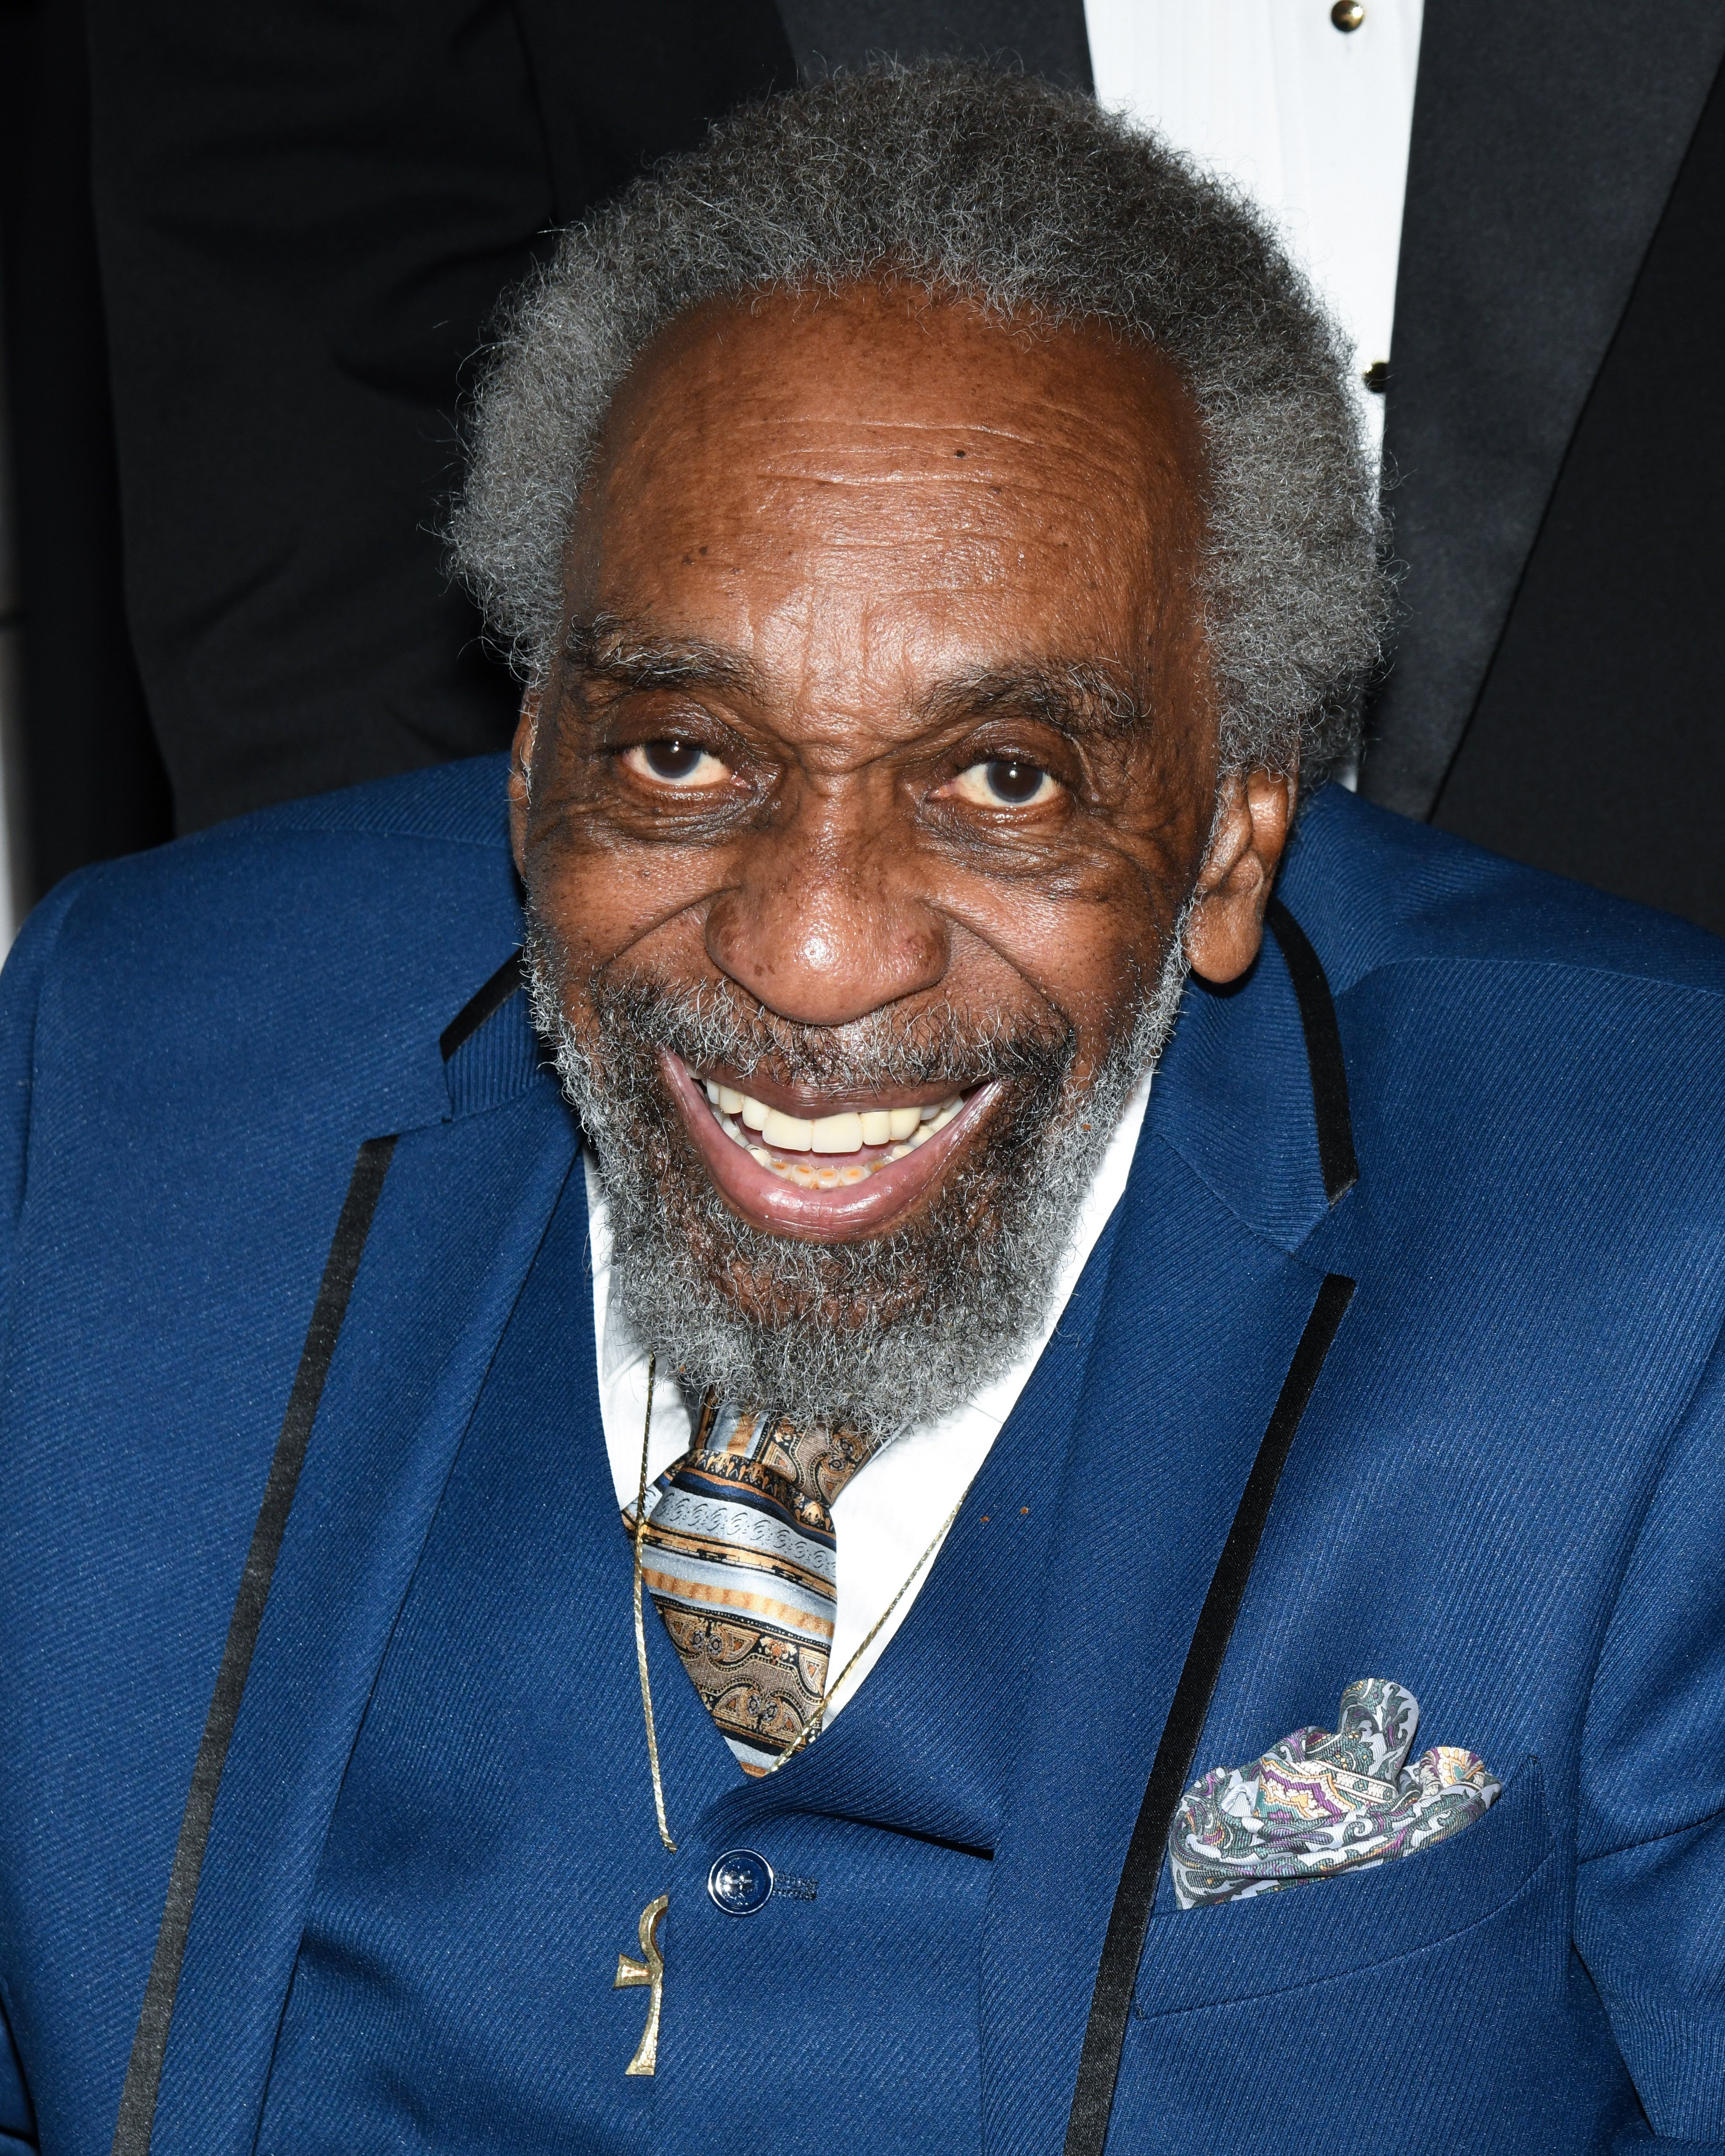 Fans flooded social media to share their fond memories of Bill Cobbs